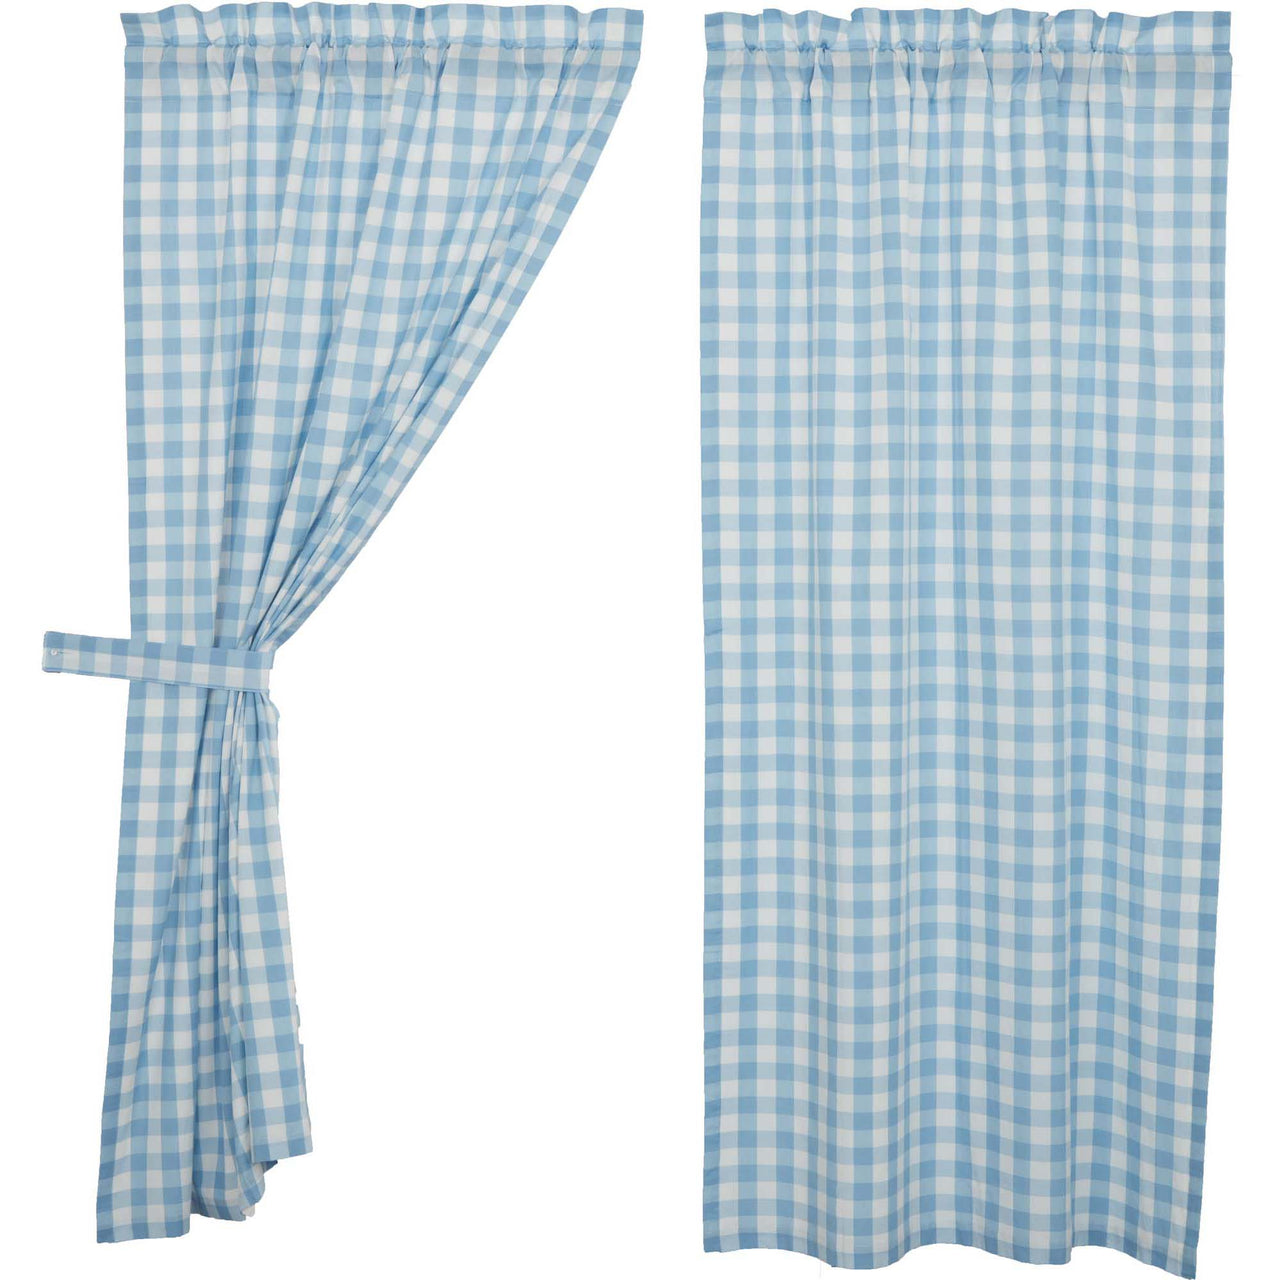 Annie Buffalo Blue Check Short Panel Set of 2 63x36 VHC Brands